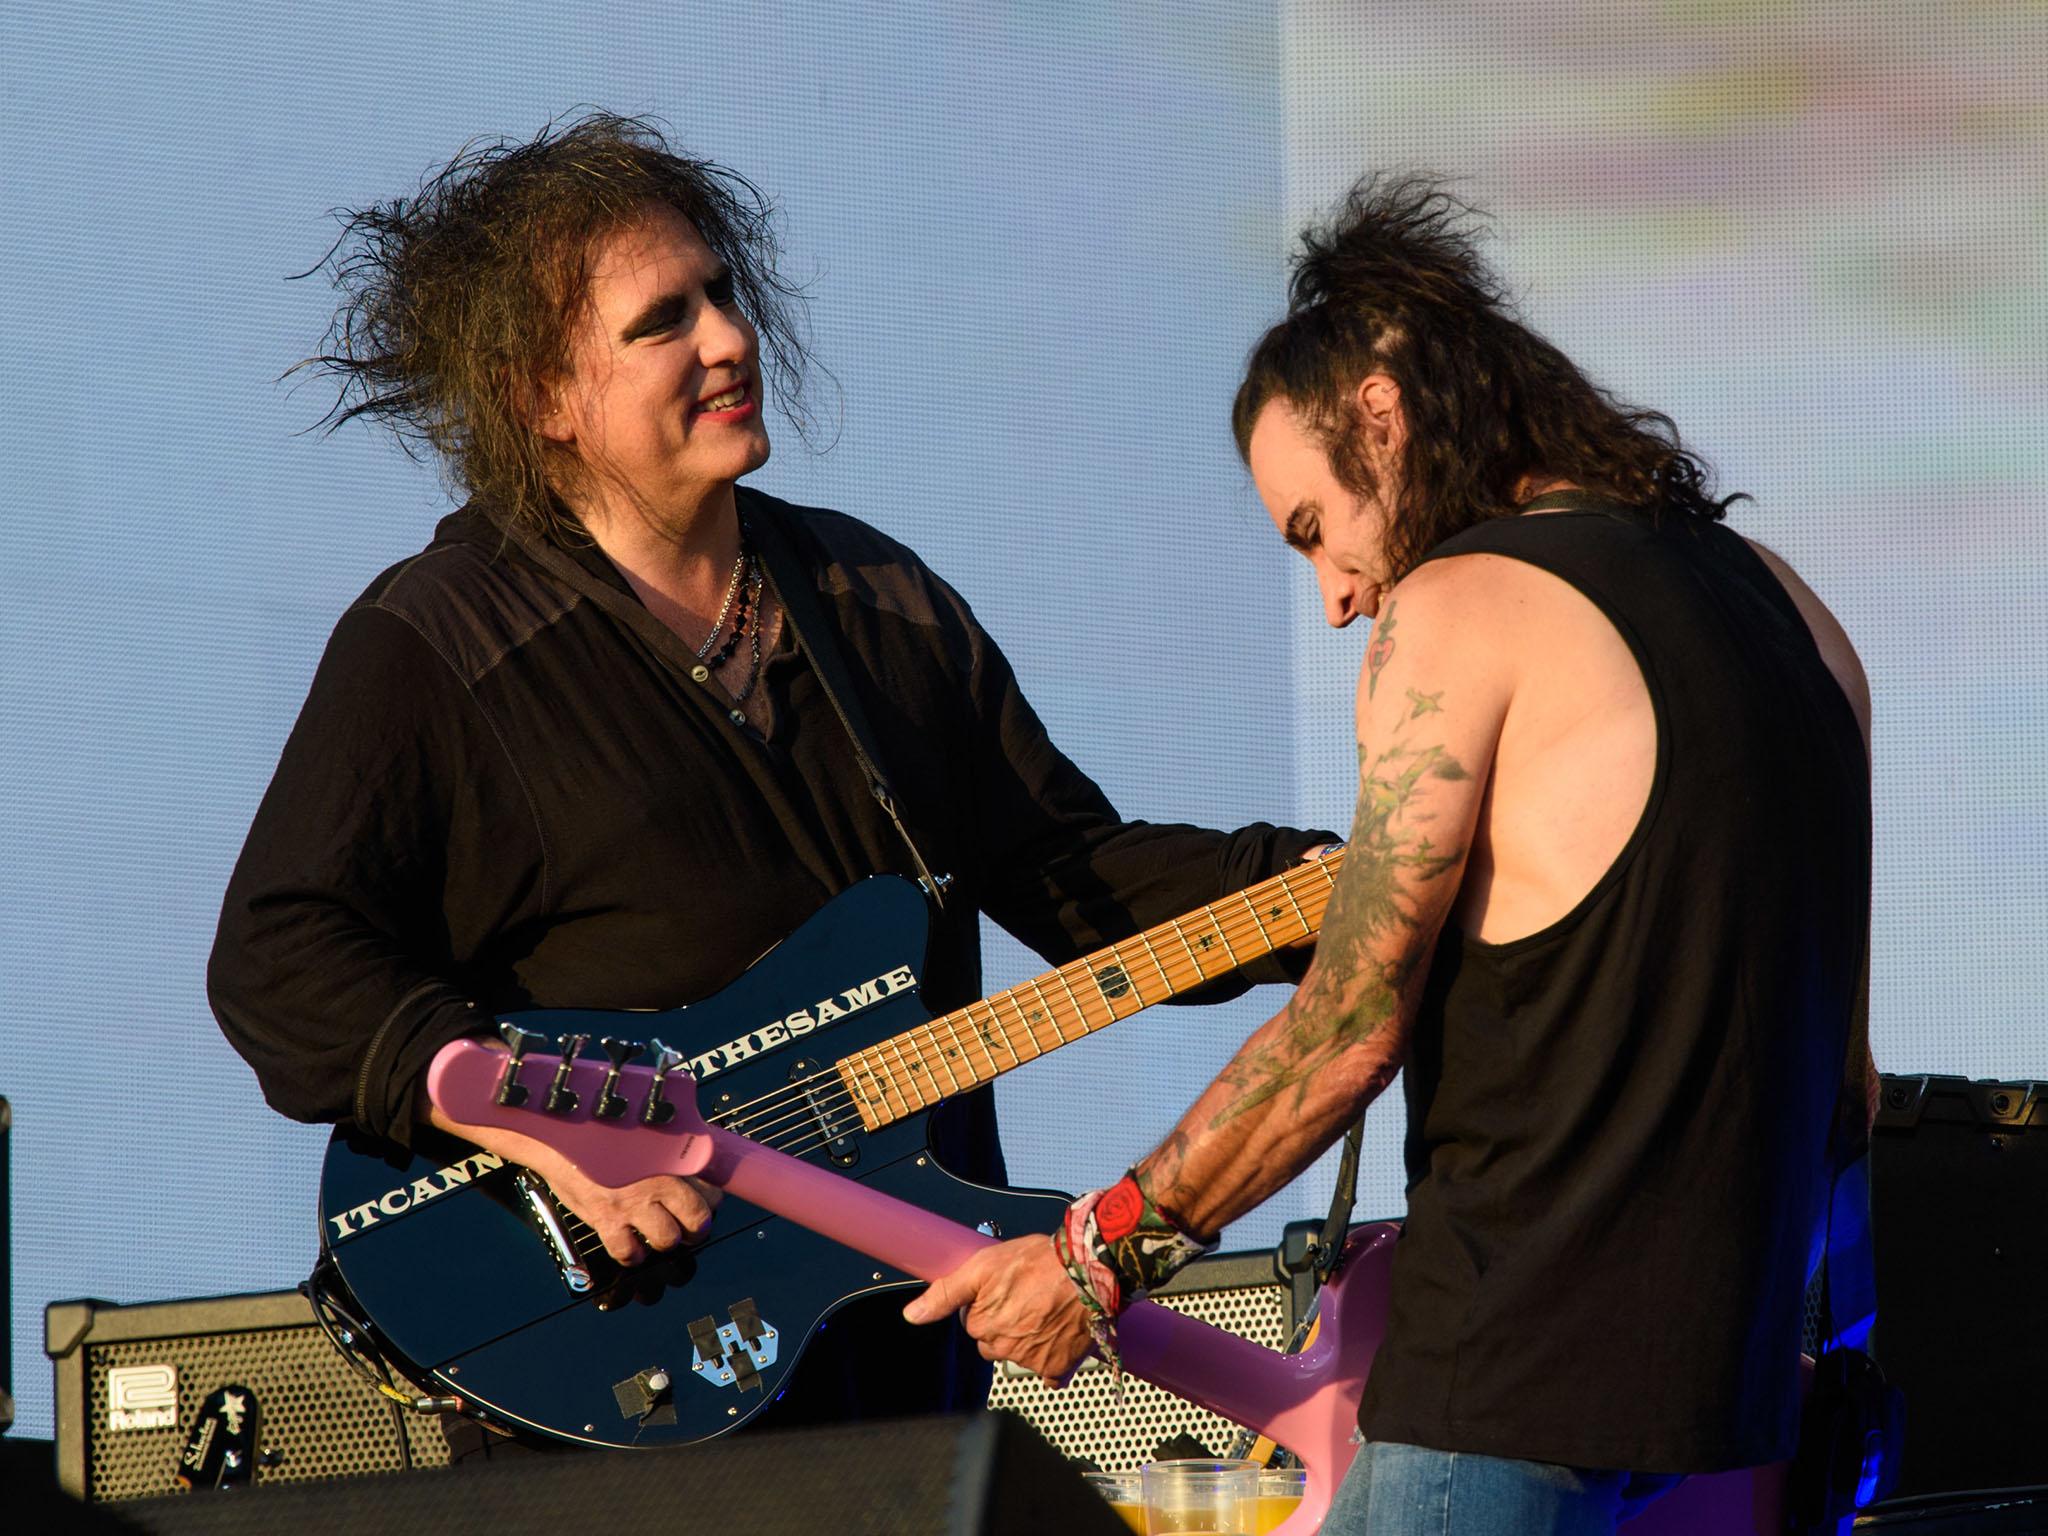 Robert Smith pulled out every crowd favourite and then some as the band tore through 40 years of hits